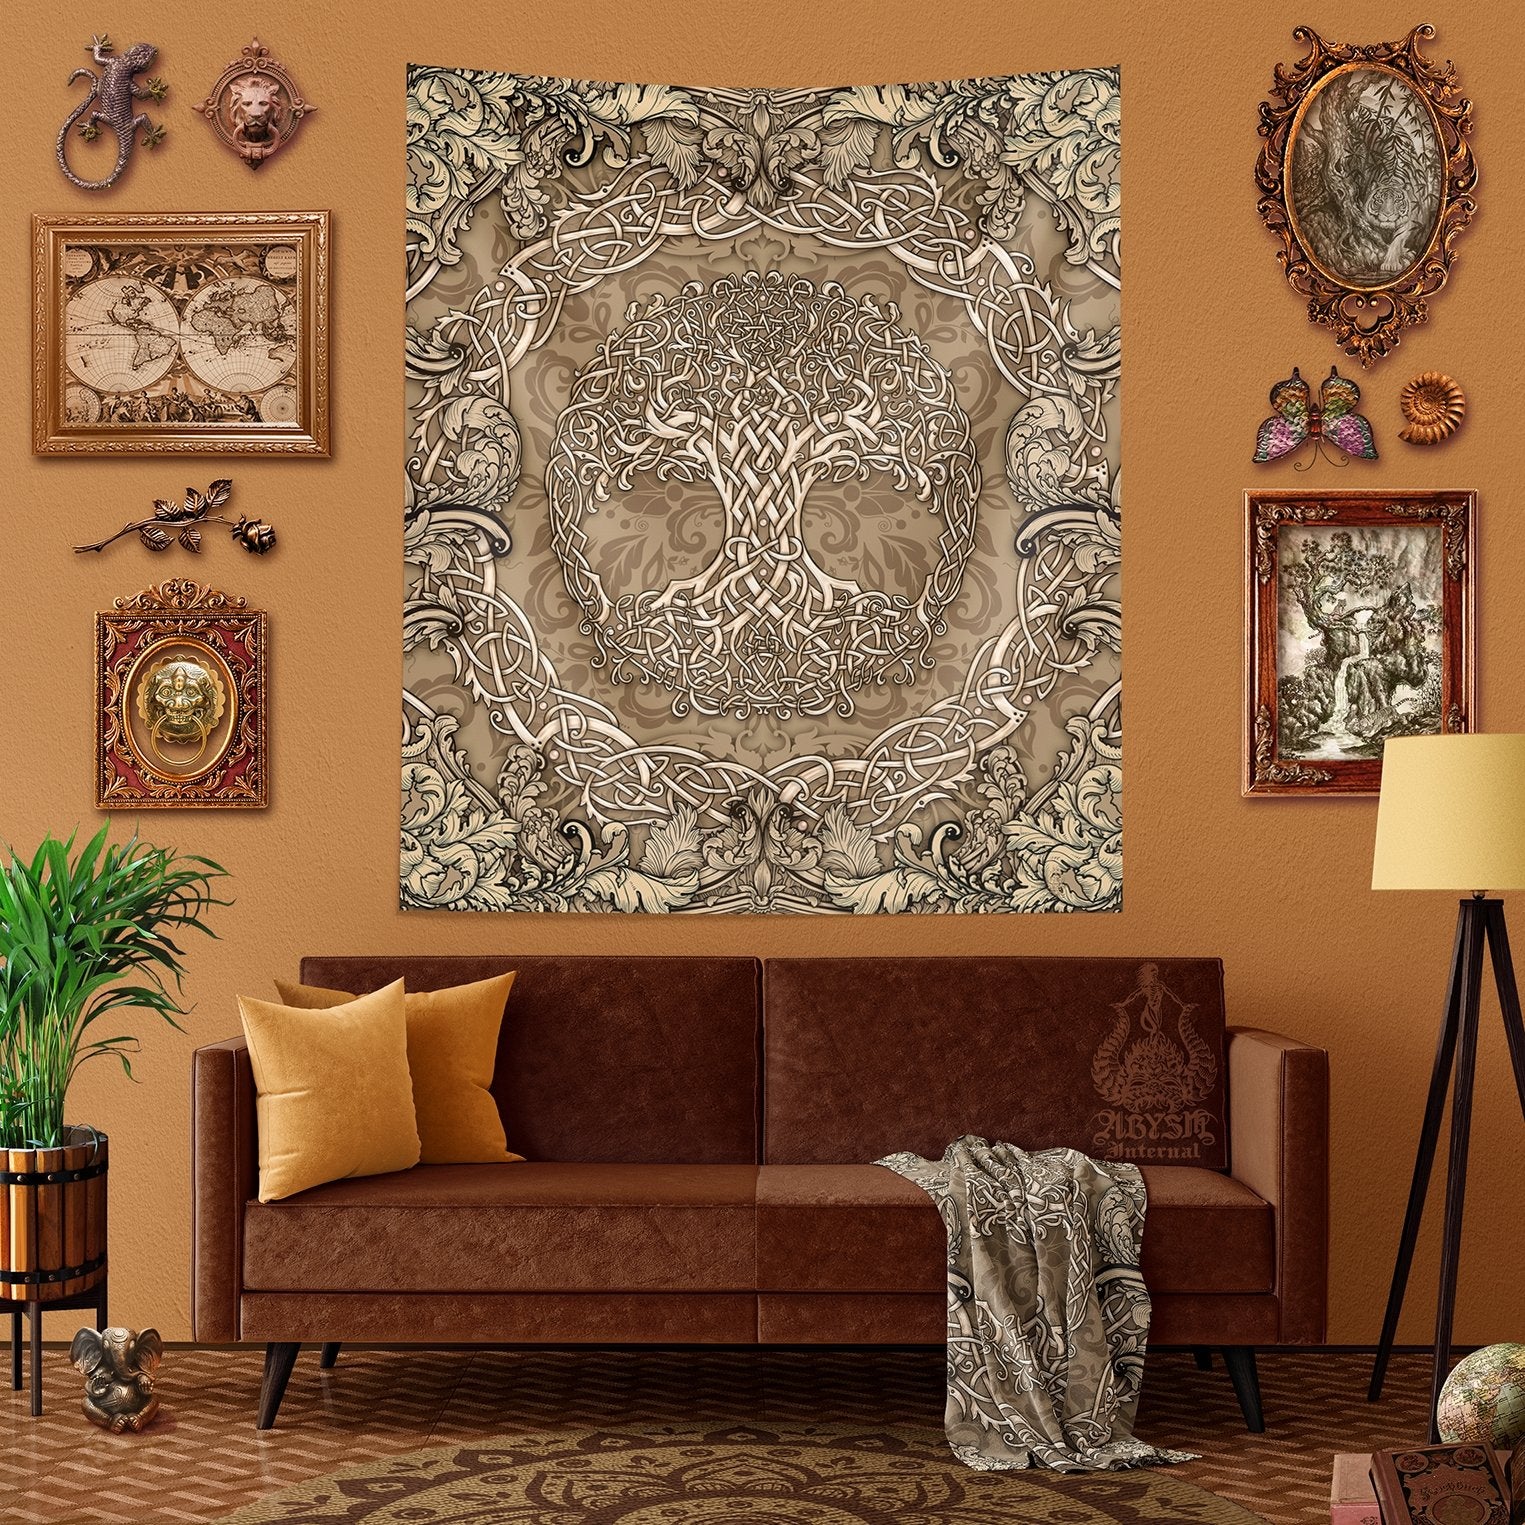 Tree of Life Tapestry, Celtic Wall Hanging, Pagan and Boho and Indie Home Decor, Art Print, Eclectic and Funky - Cream - Abysm Internal